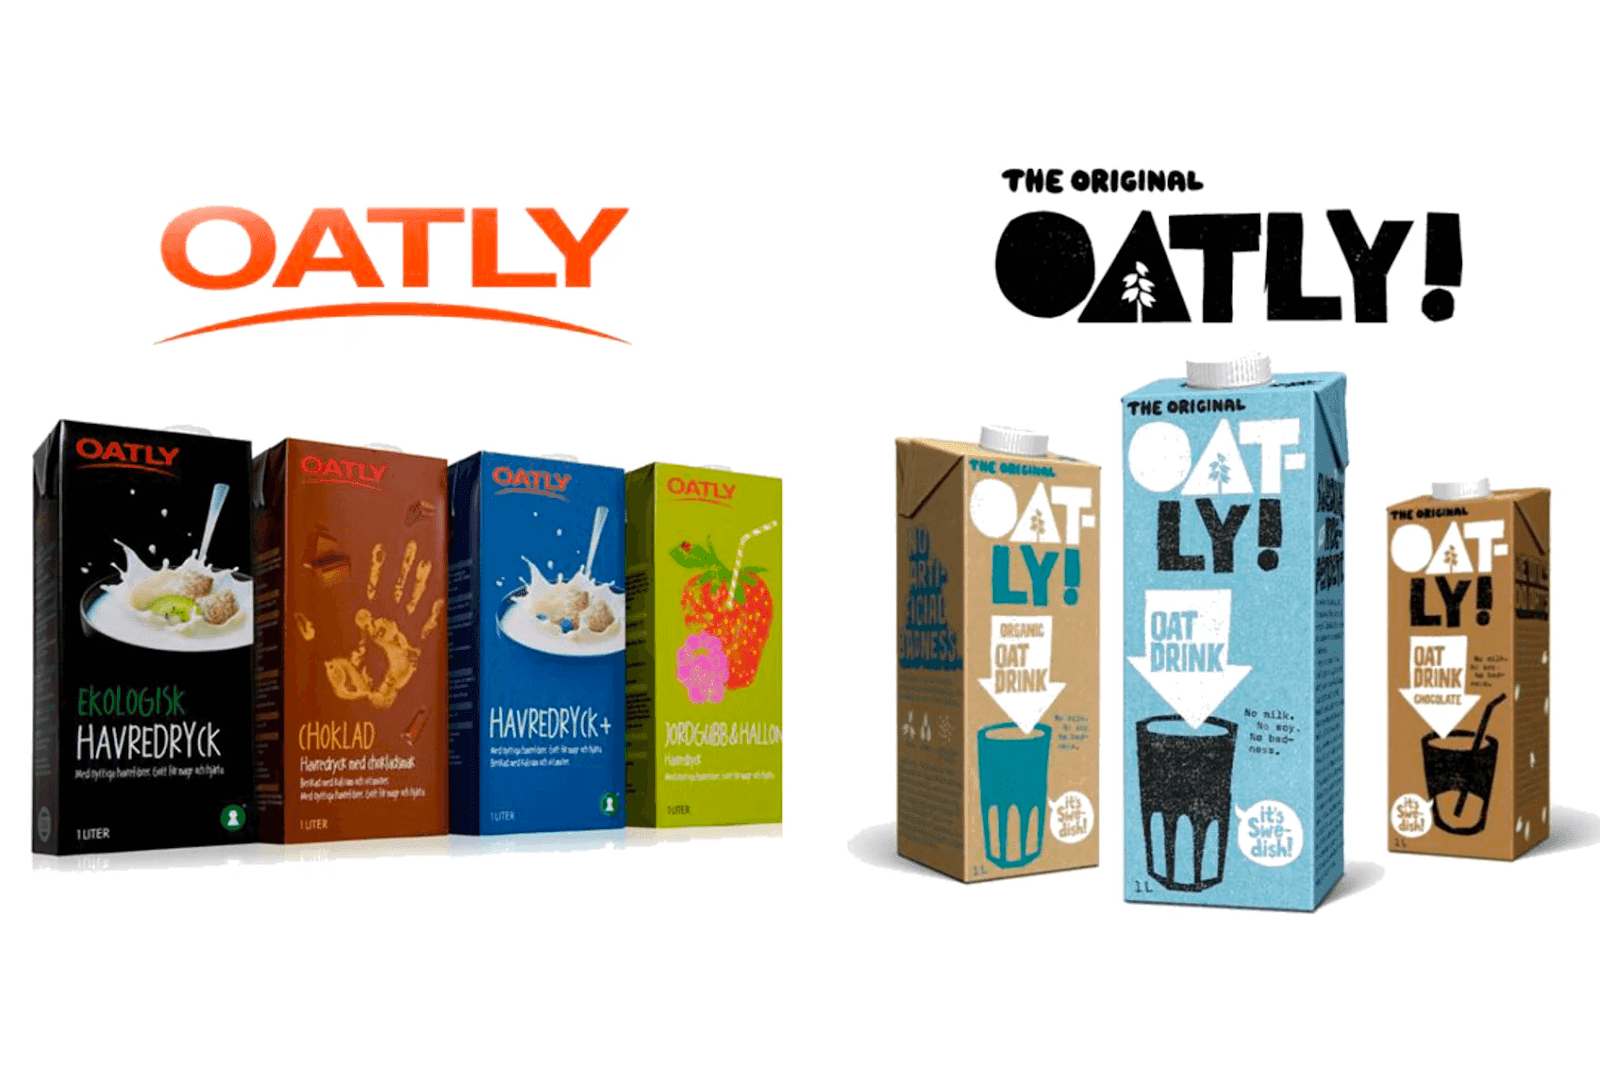 Oatly products with two different logos